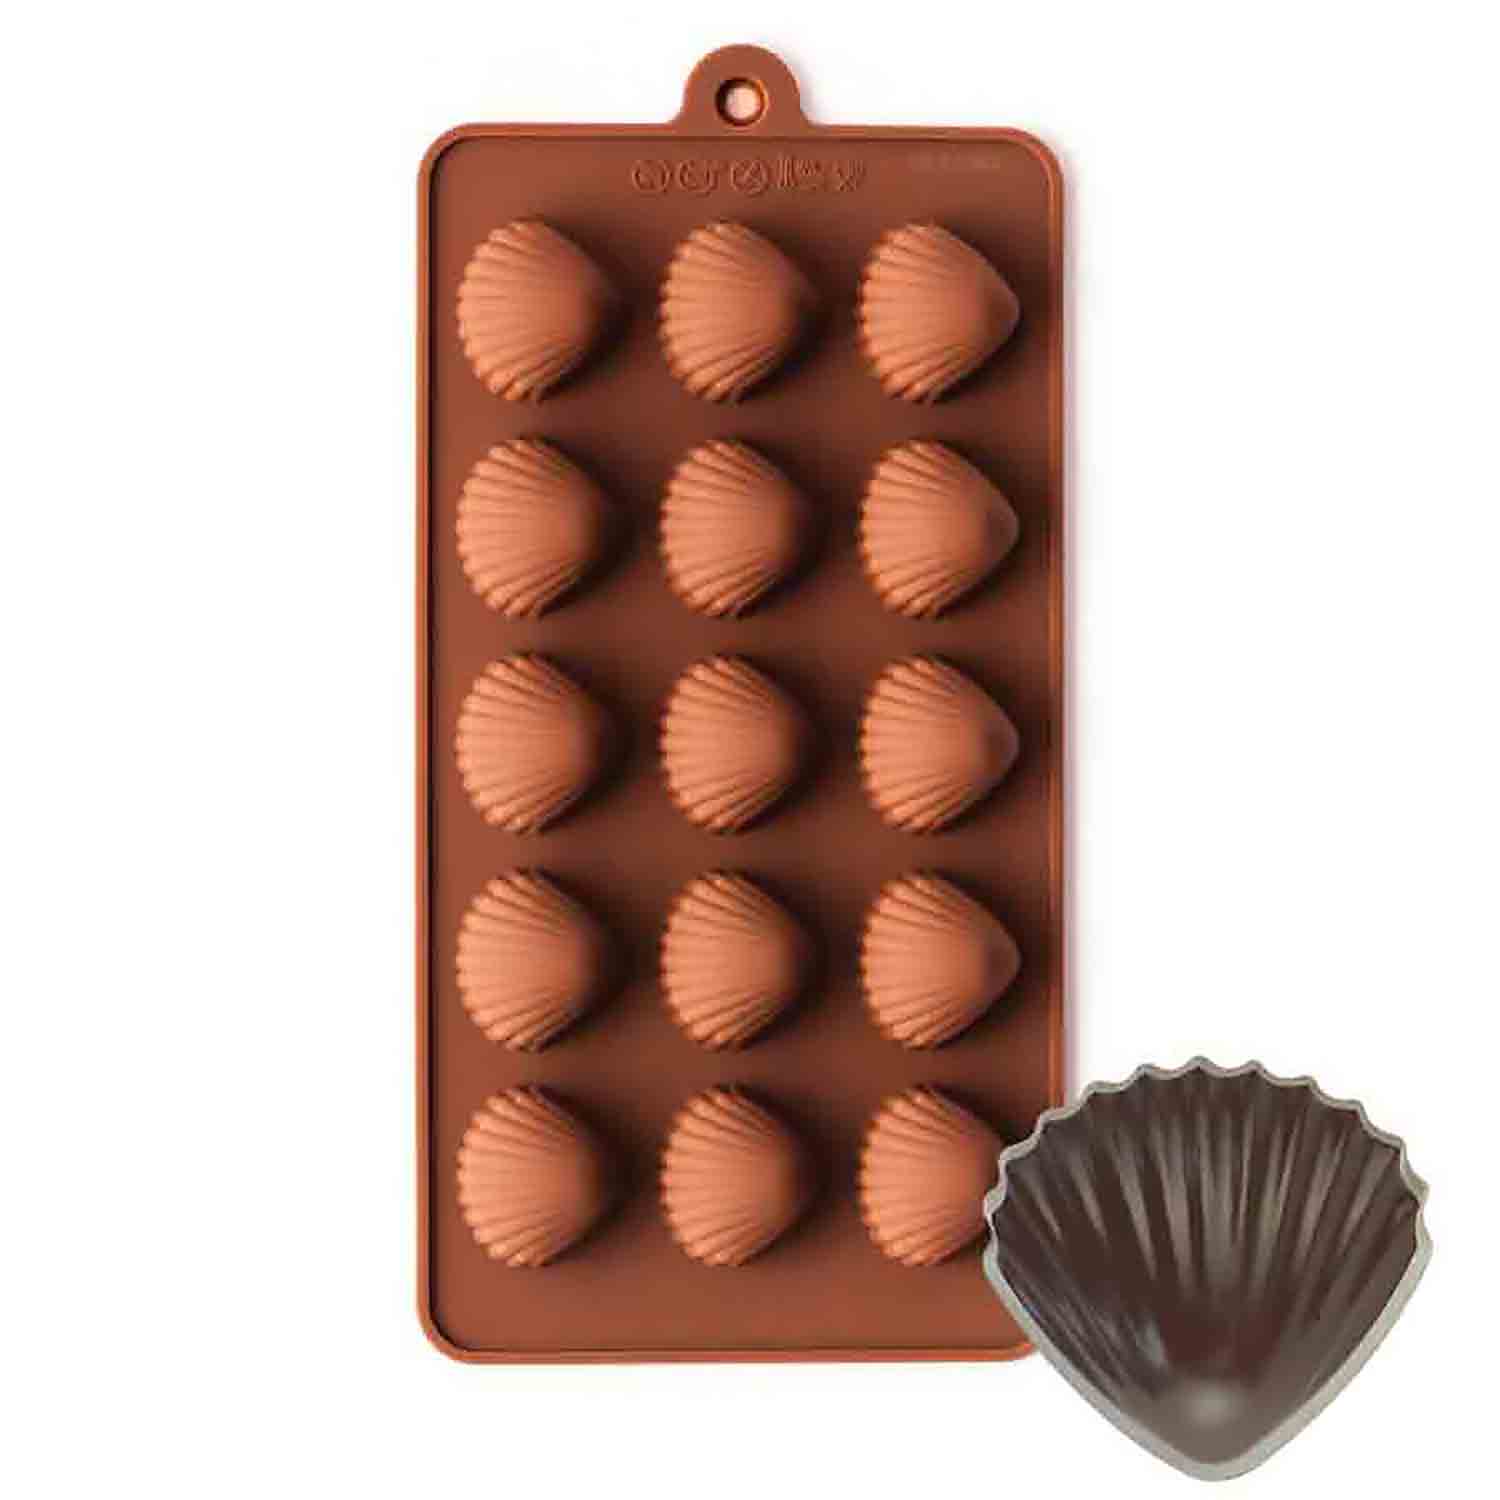 Seashell Silicone Chocolate Candy Mold